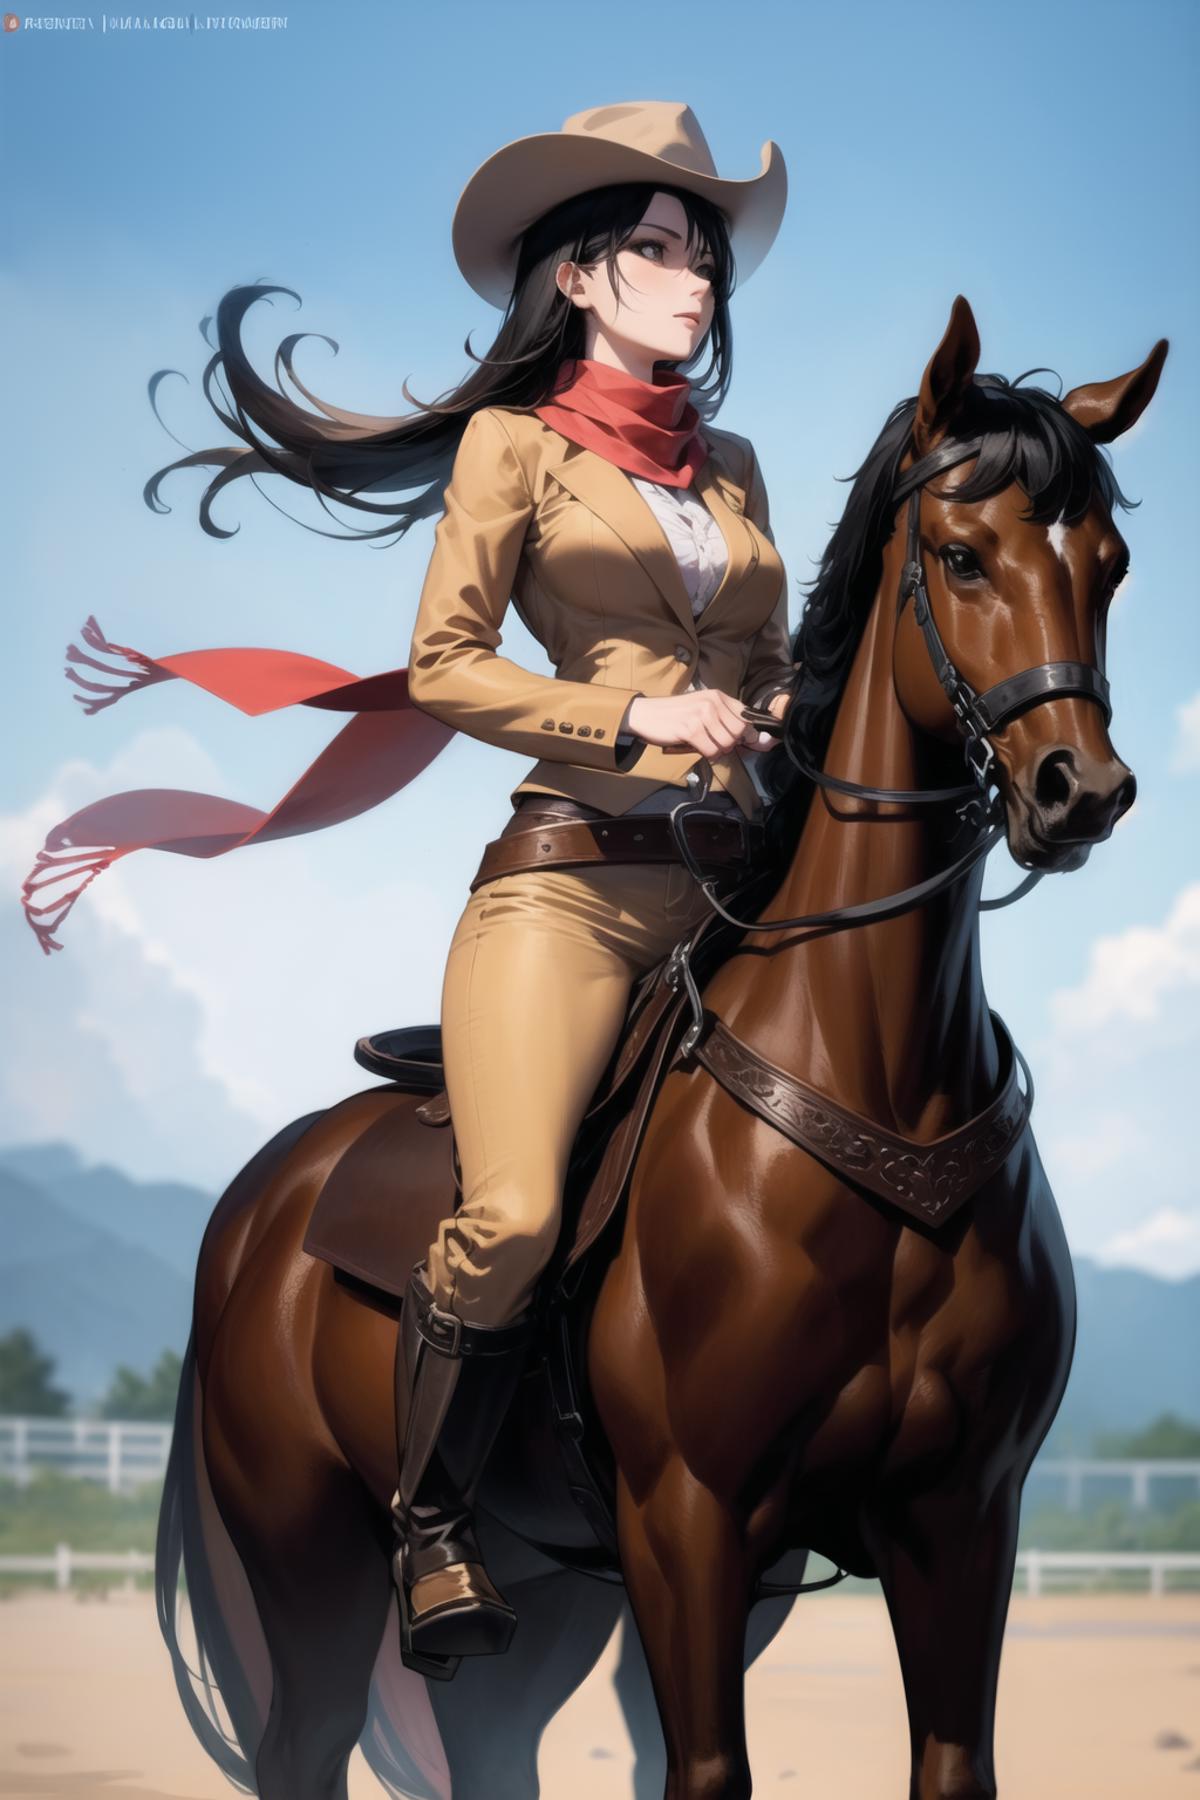 Cowgirl outfit image by psoft